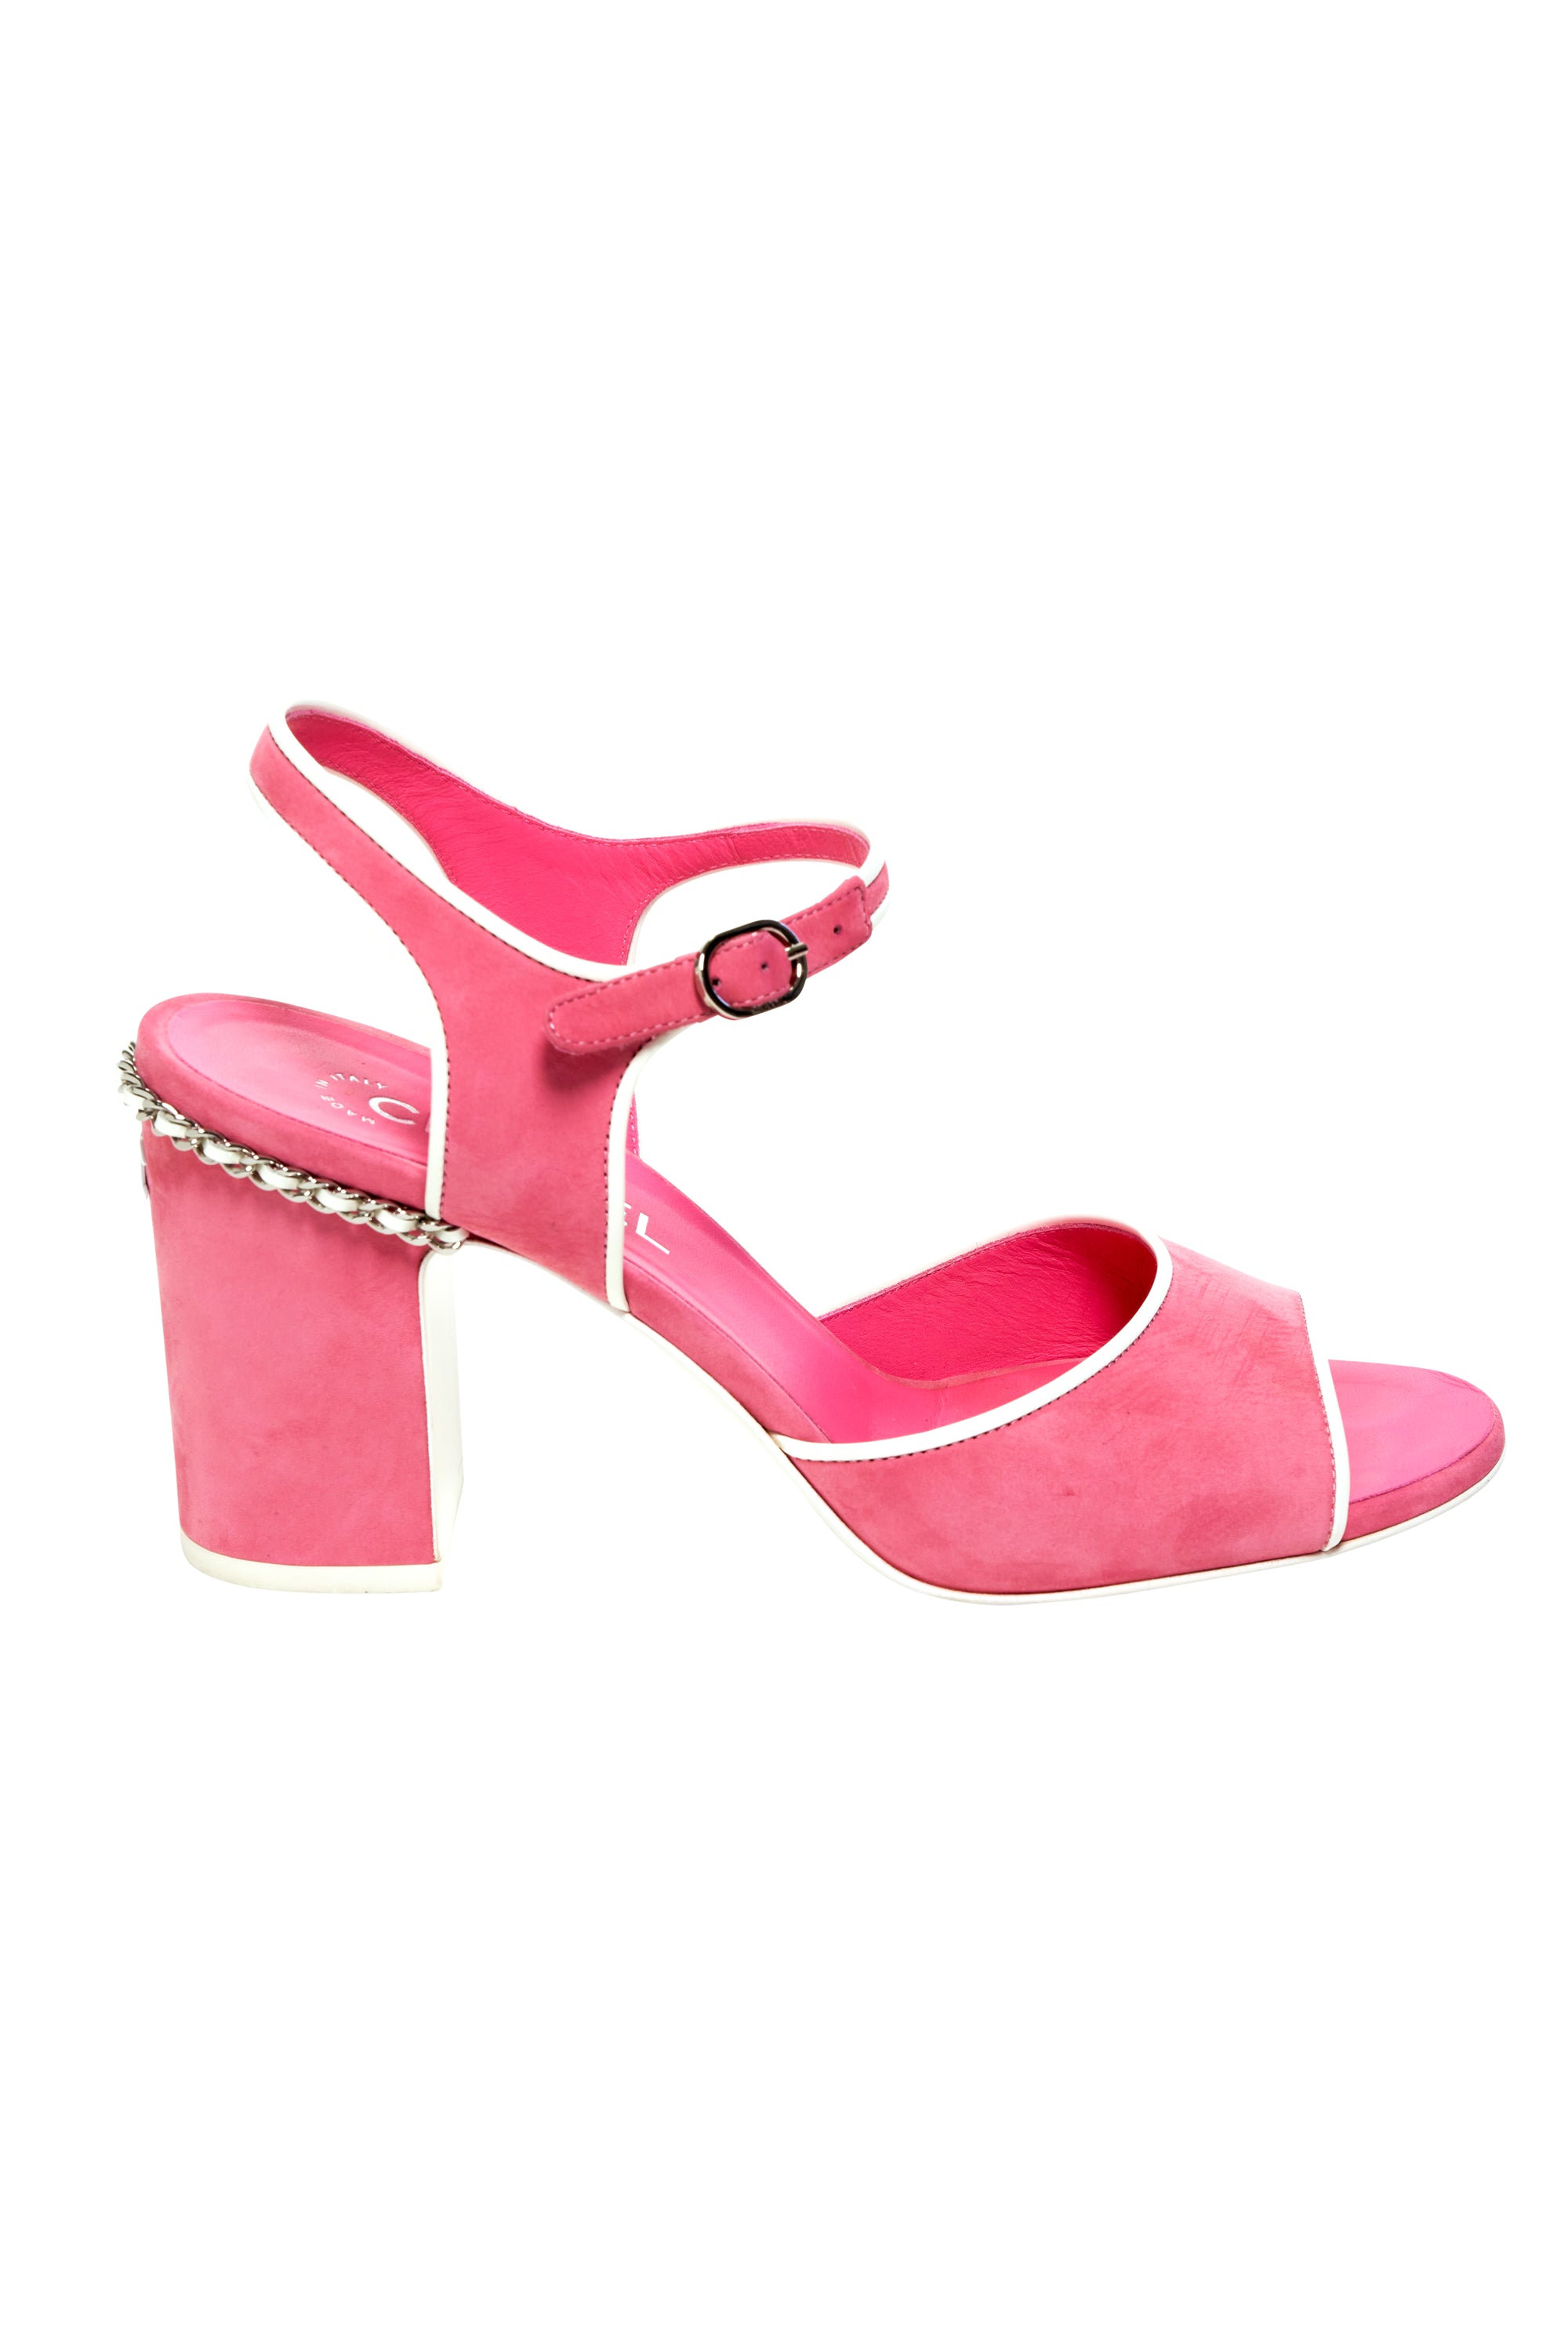 Chanel Pink and White Block Heel Sandals size 40